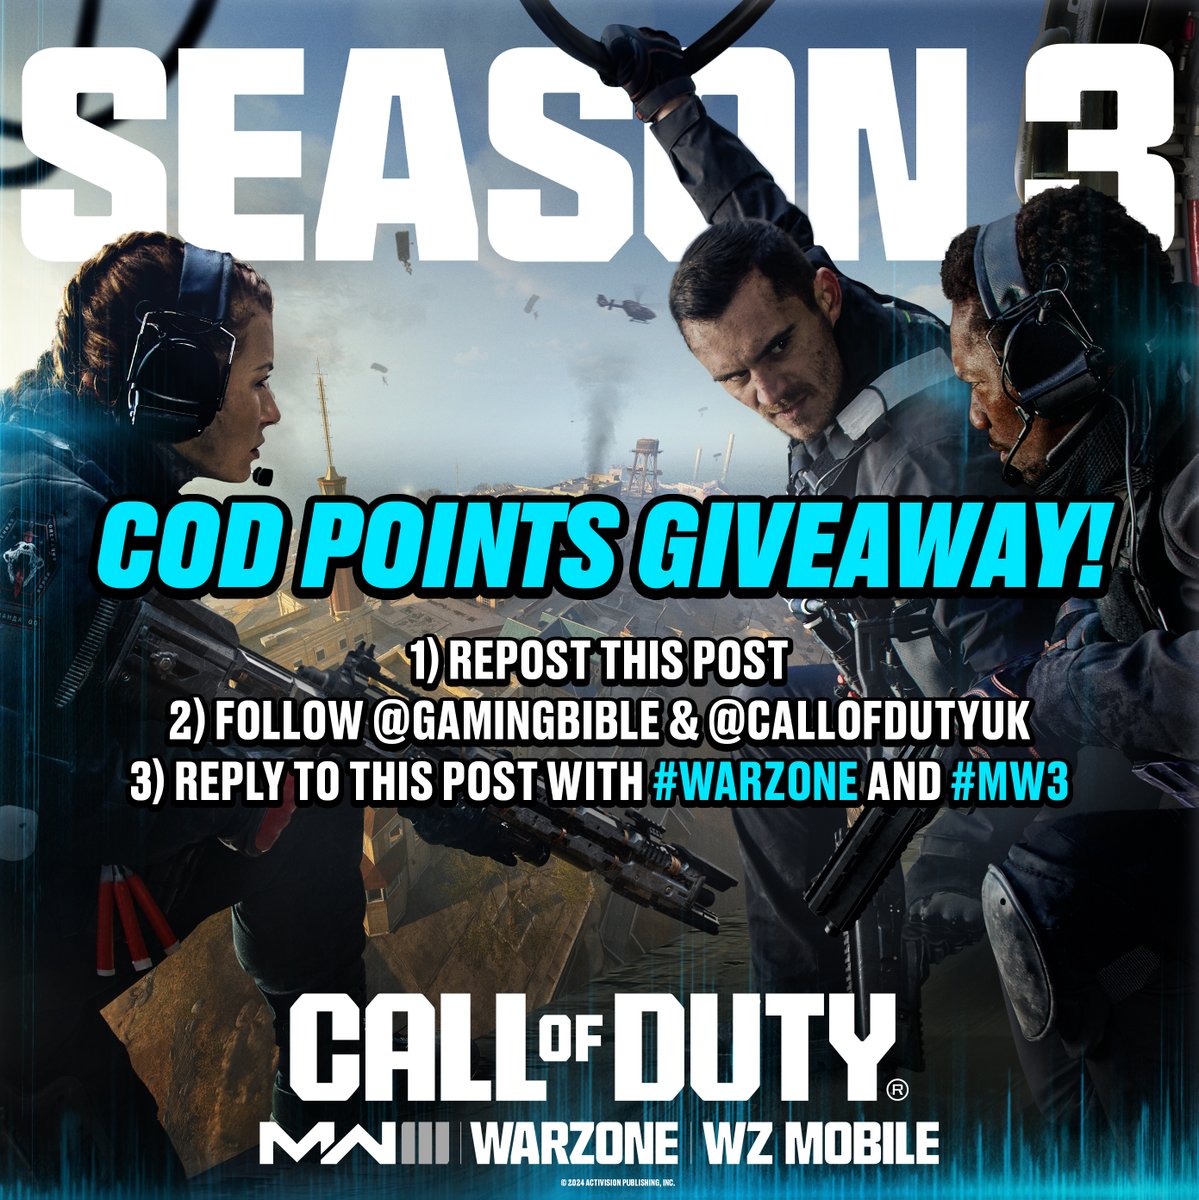 🚨 COD Points Giveaway 🚨 Season 3 of Call of Duty #ModernWarfareIII and #Warzone has landed, with the return of Rebirth Island 🏝️ For a chance to win 2,400 COD Points, follow the three steps in the image below. Good luck 🤞 @CallofDutyUK